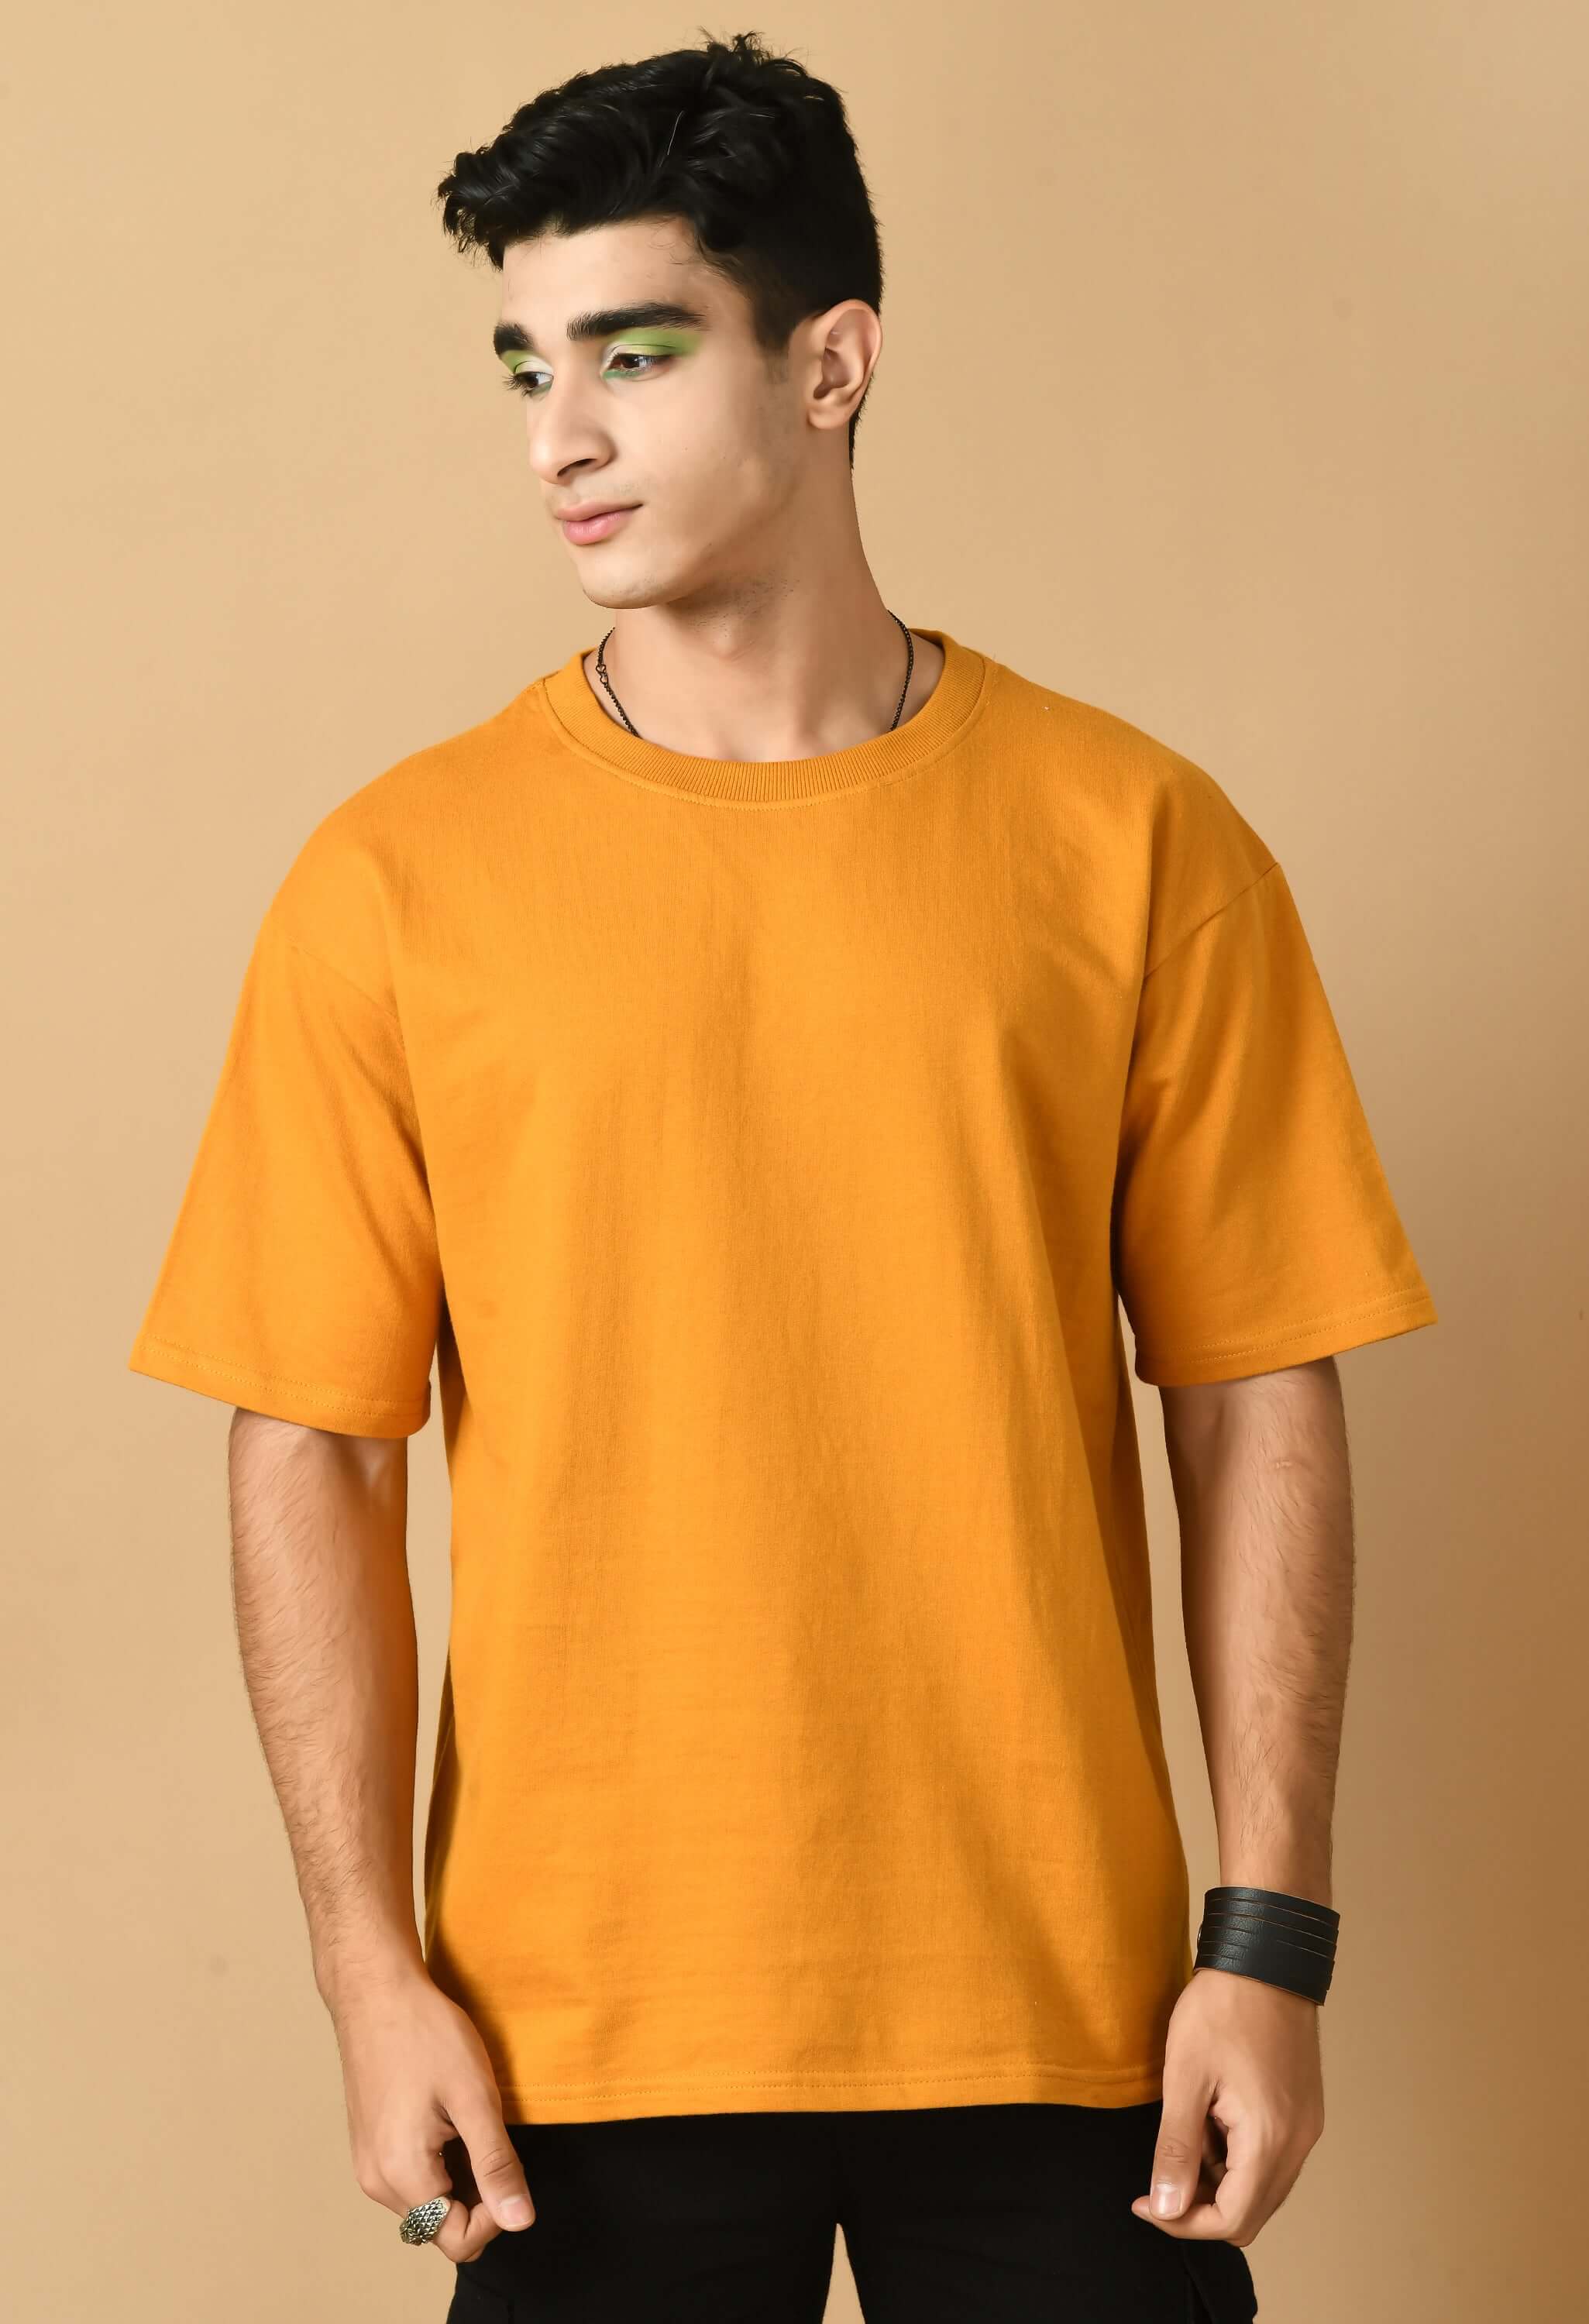 Revolution printed mustard oversized t-shirt by offmint